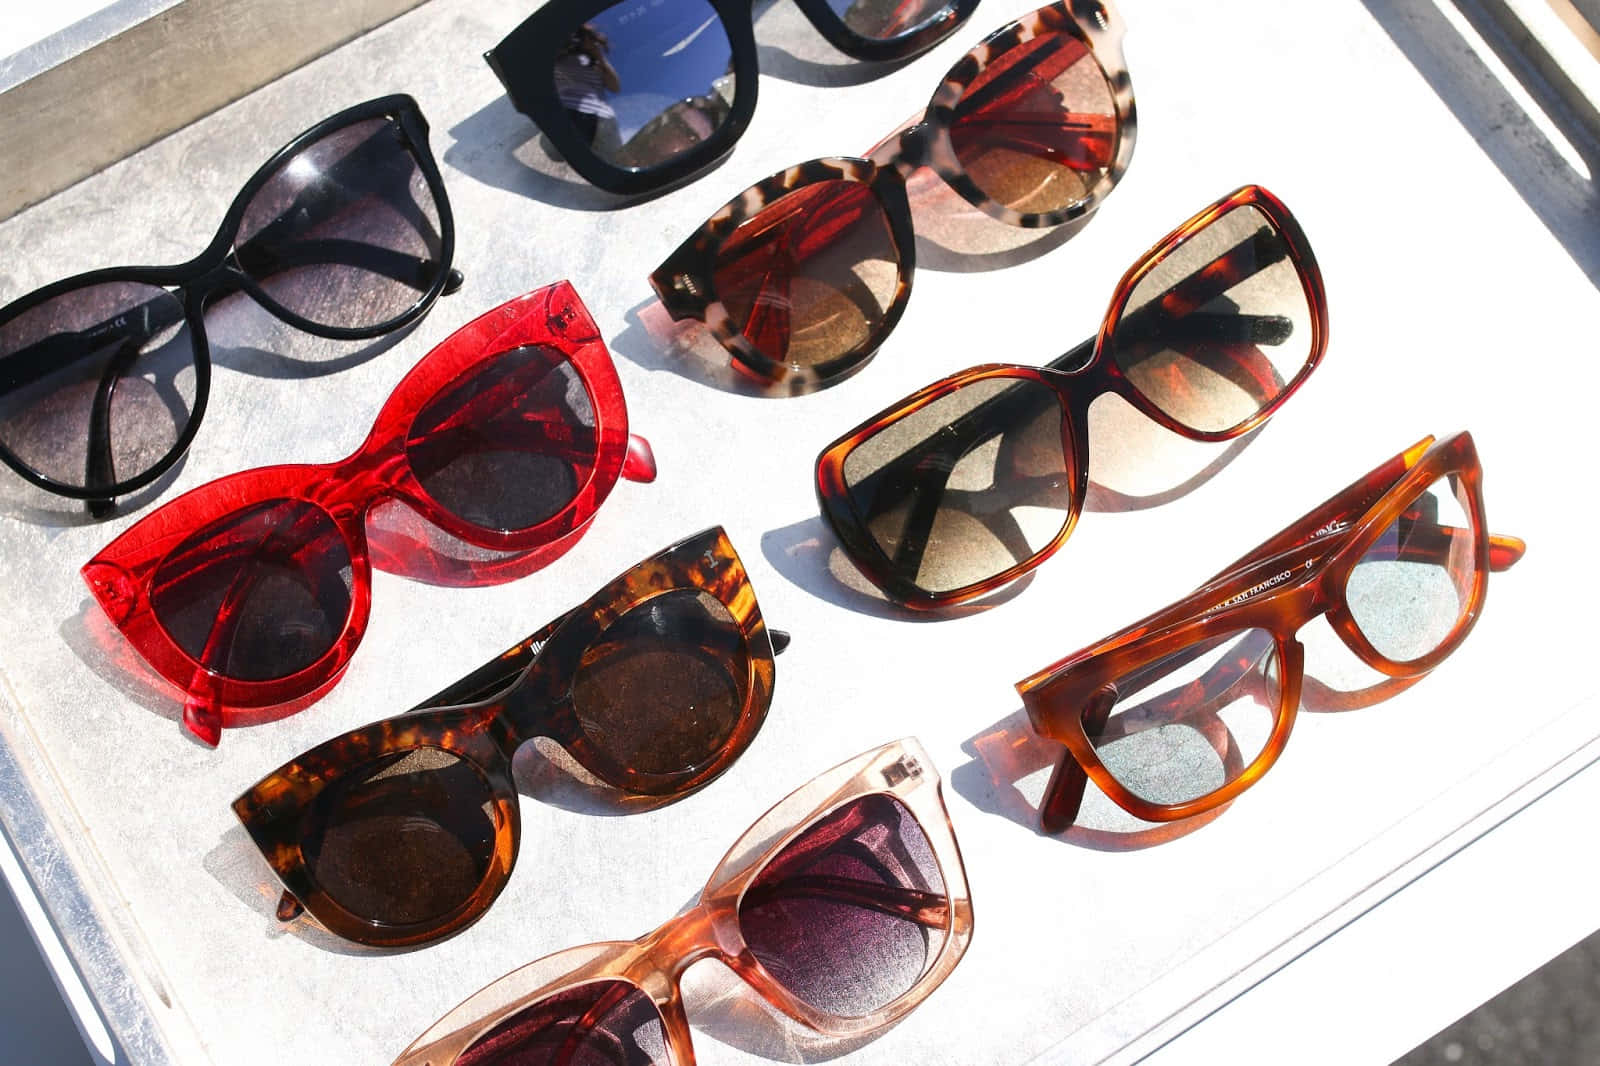 Look fly in these sleek and stylish sunglasses